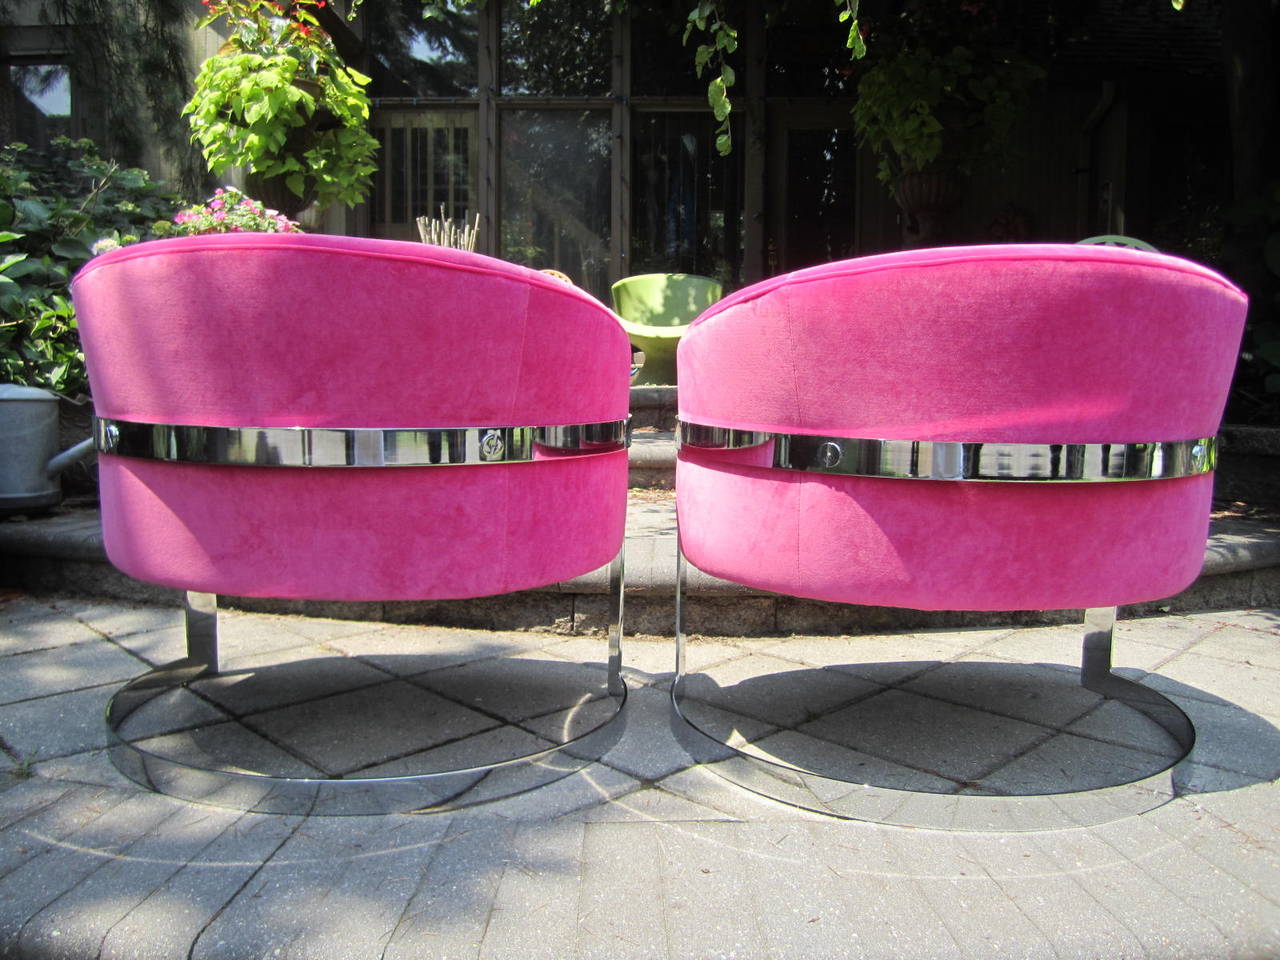 Excellent pair of Milo Baughman barrel back chrome cantilevered lounge chairs. This pair have been reupholstered in a fabulous hot pink high end velvet. They look absolutely amazing with mirror polished chrome and Barbie pink velvet. All of the